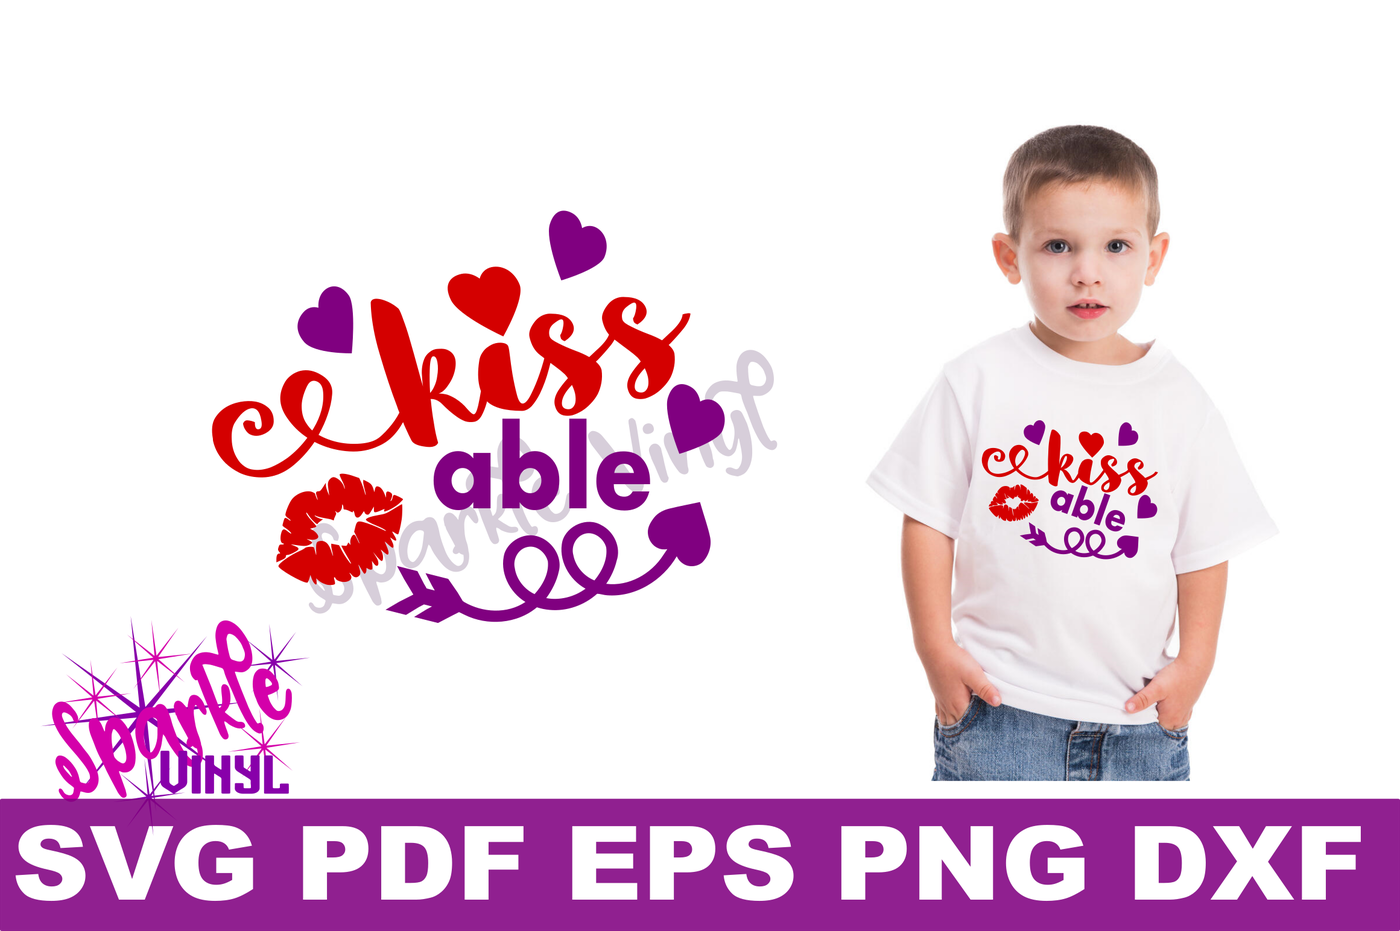 Download Svg Valentine Toddler Girl Kids Adult Ladies Shirt Outfit Valentine Svg Designs Printable Cut File For Cricut Or Silhouette Dxf Eps Png Pdf By Sparkle Vinyl Designs Thehungryjpeg Com